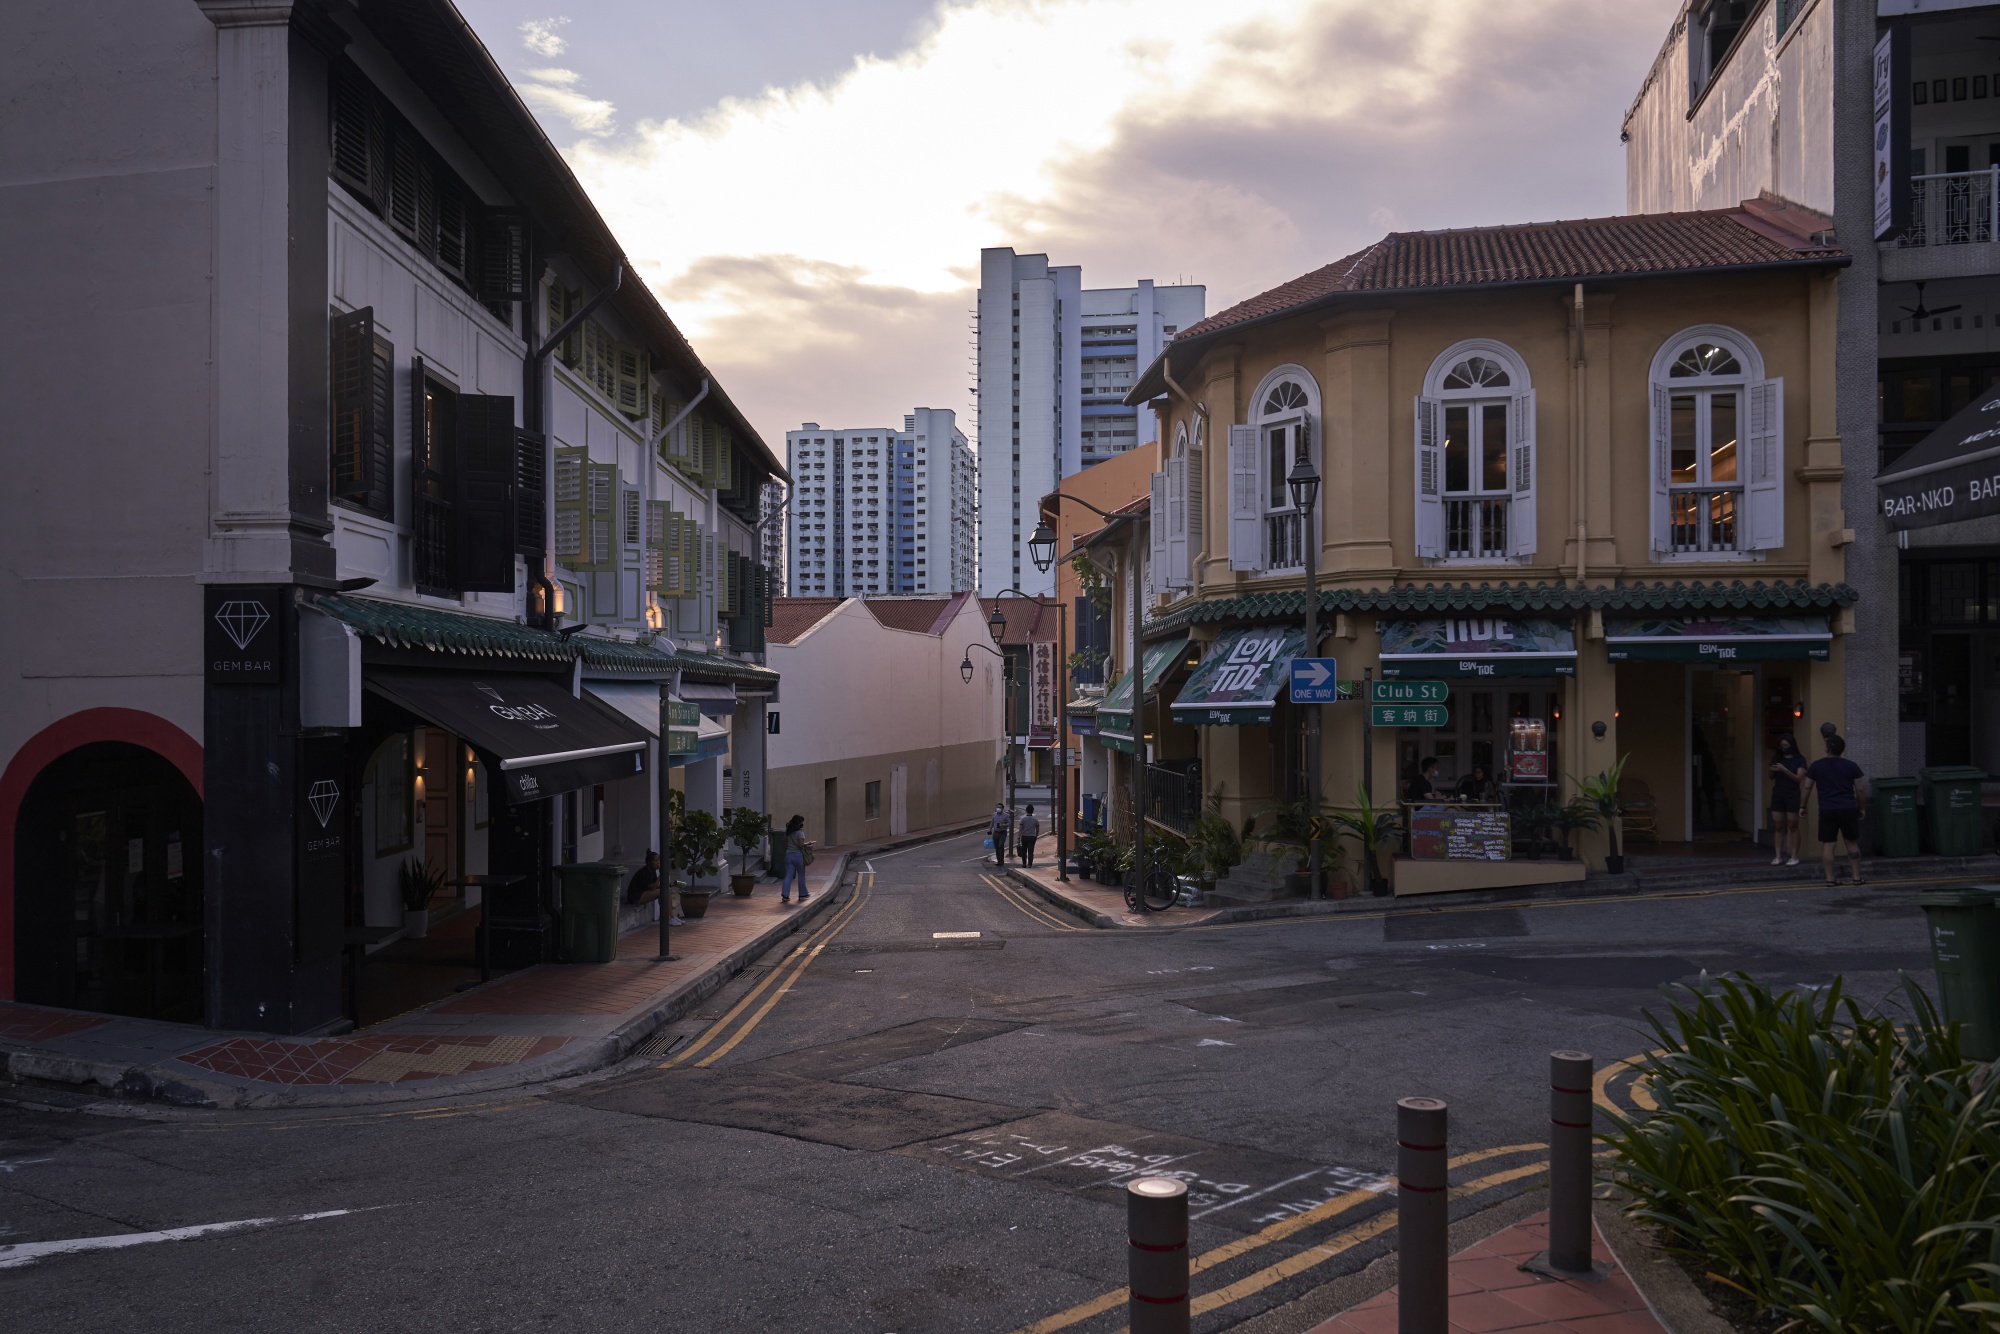 Near-empty streets in the Chinatown area of Singapore, on&nbsp;Aug. 3.